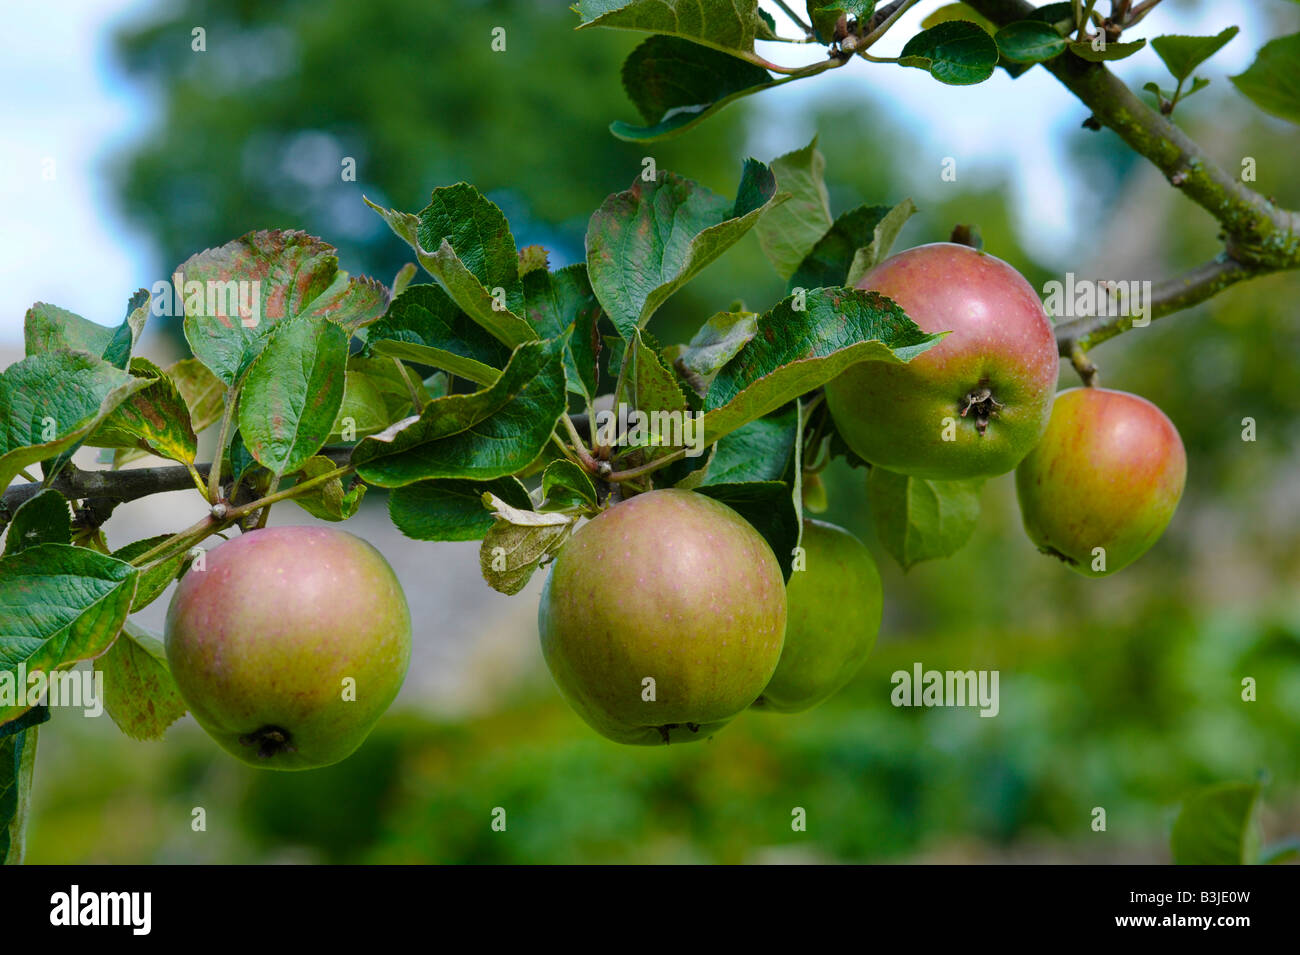 Apples growing in an English orchard. The variety is Winter Pearmain, an old English cultivar Stock Photo